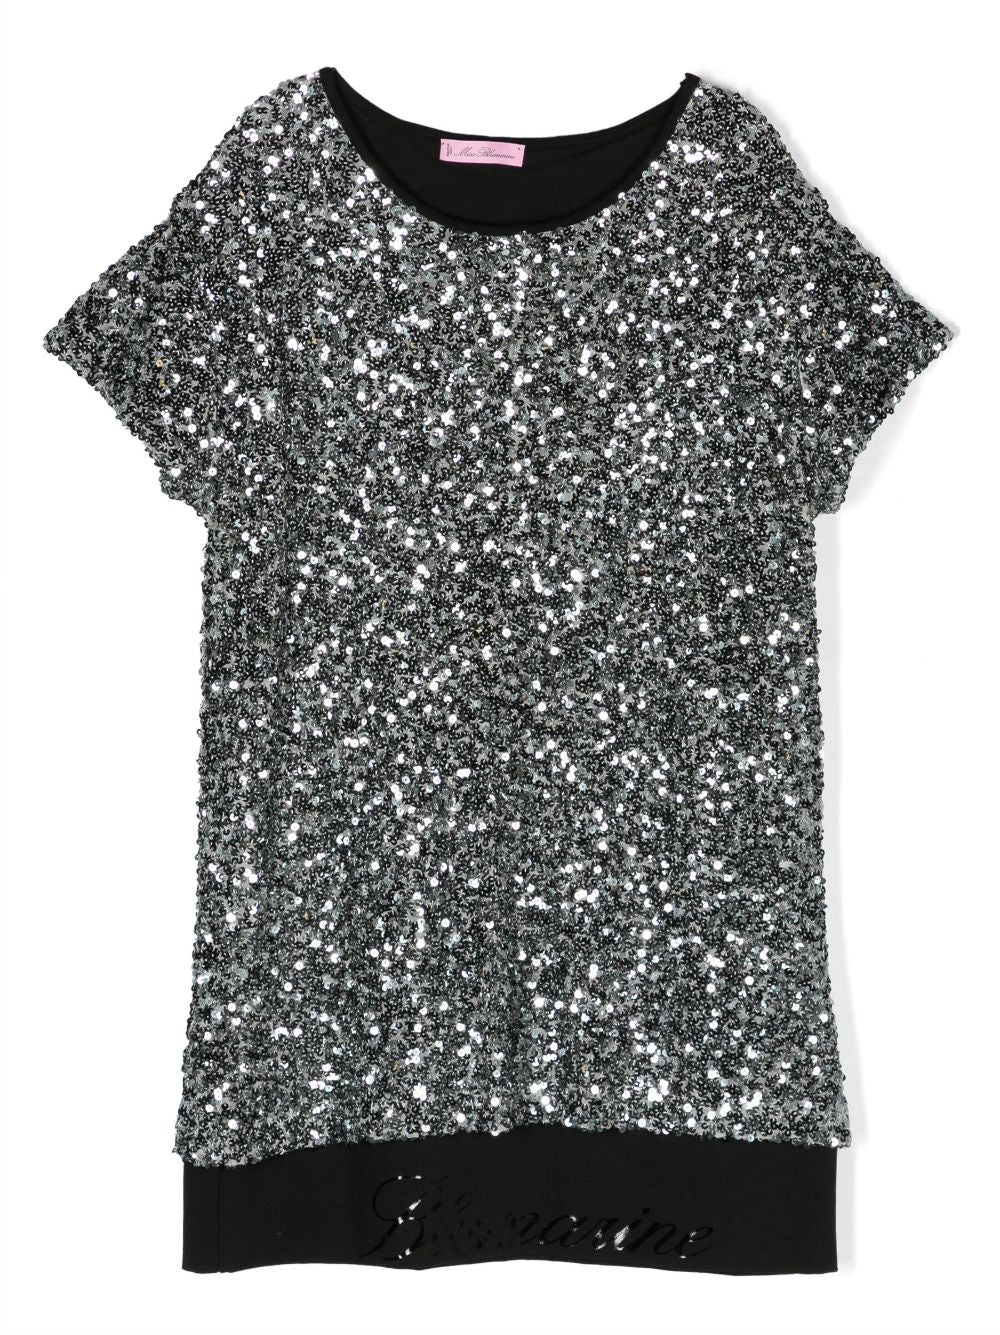 Silver dress for girls with sequins